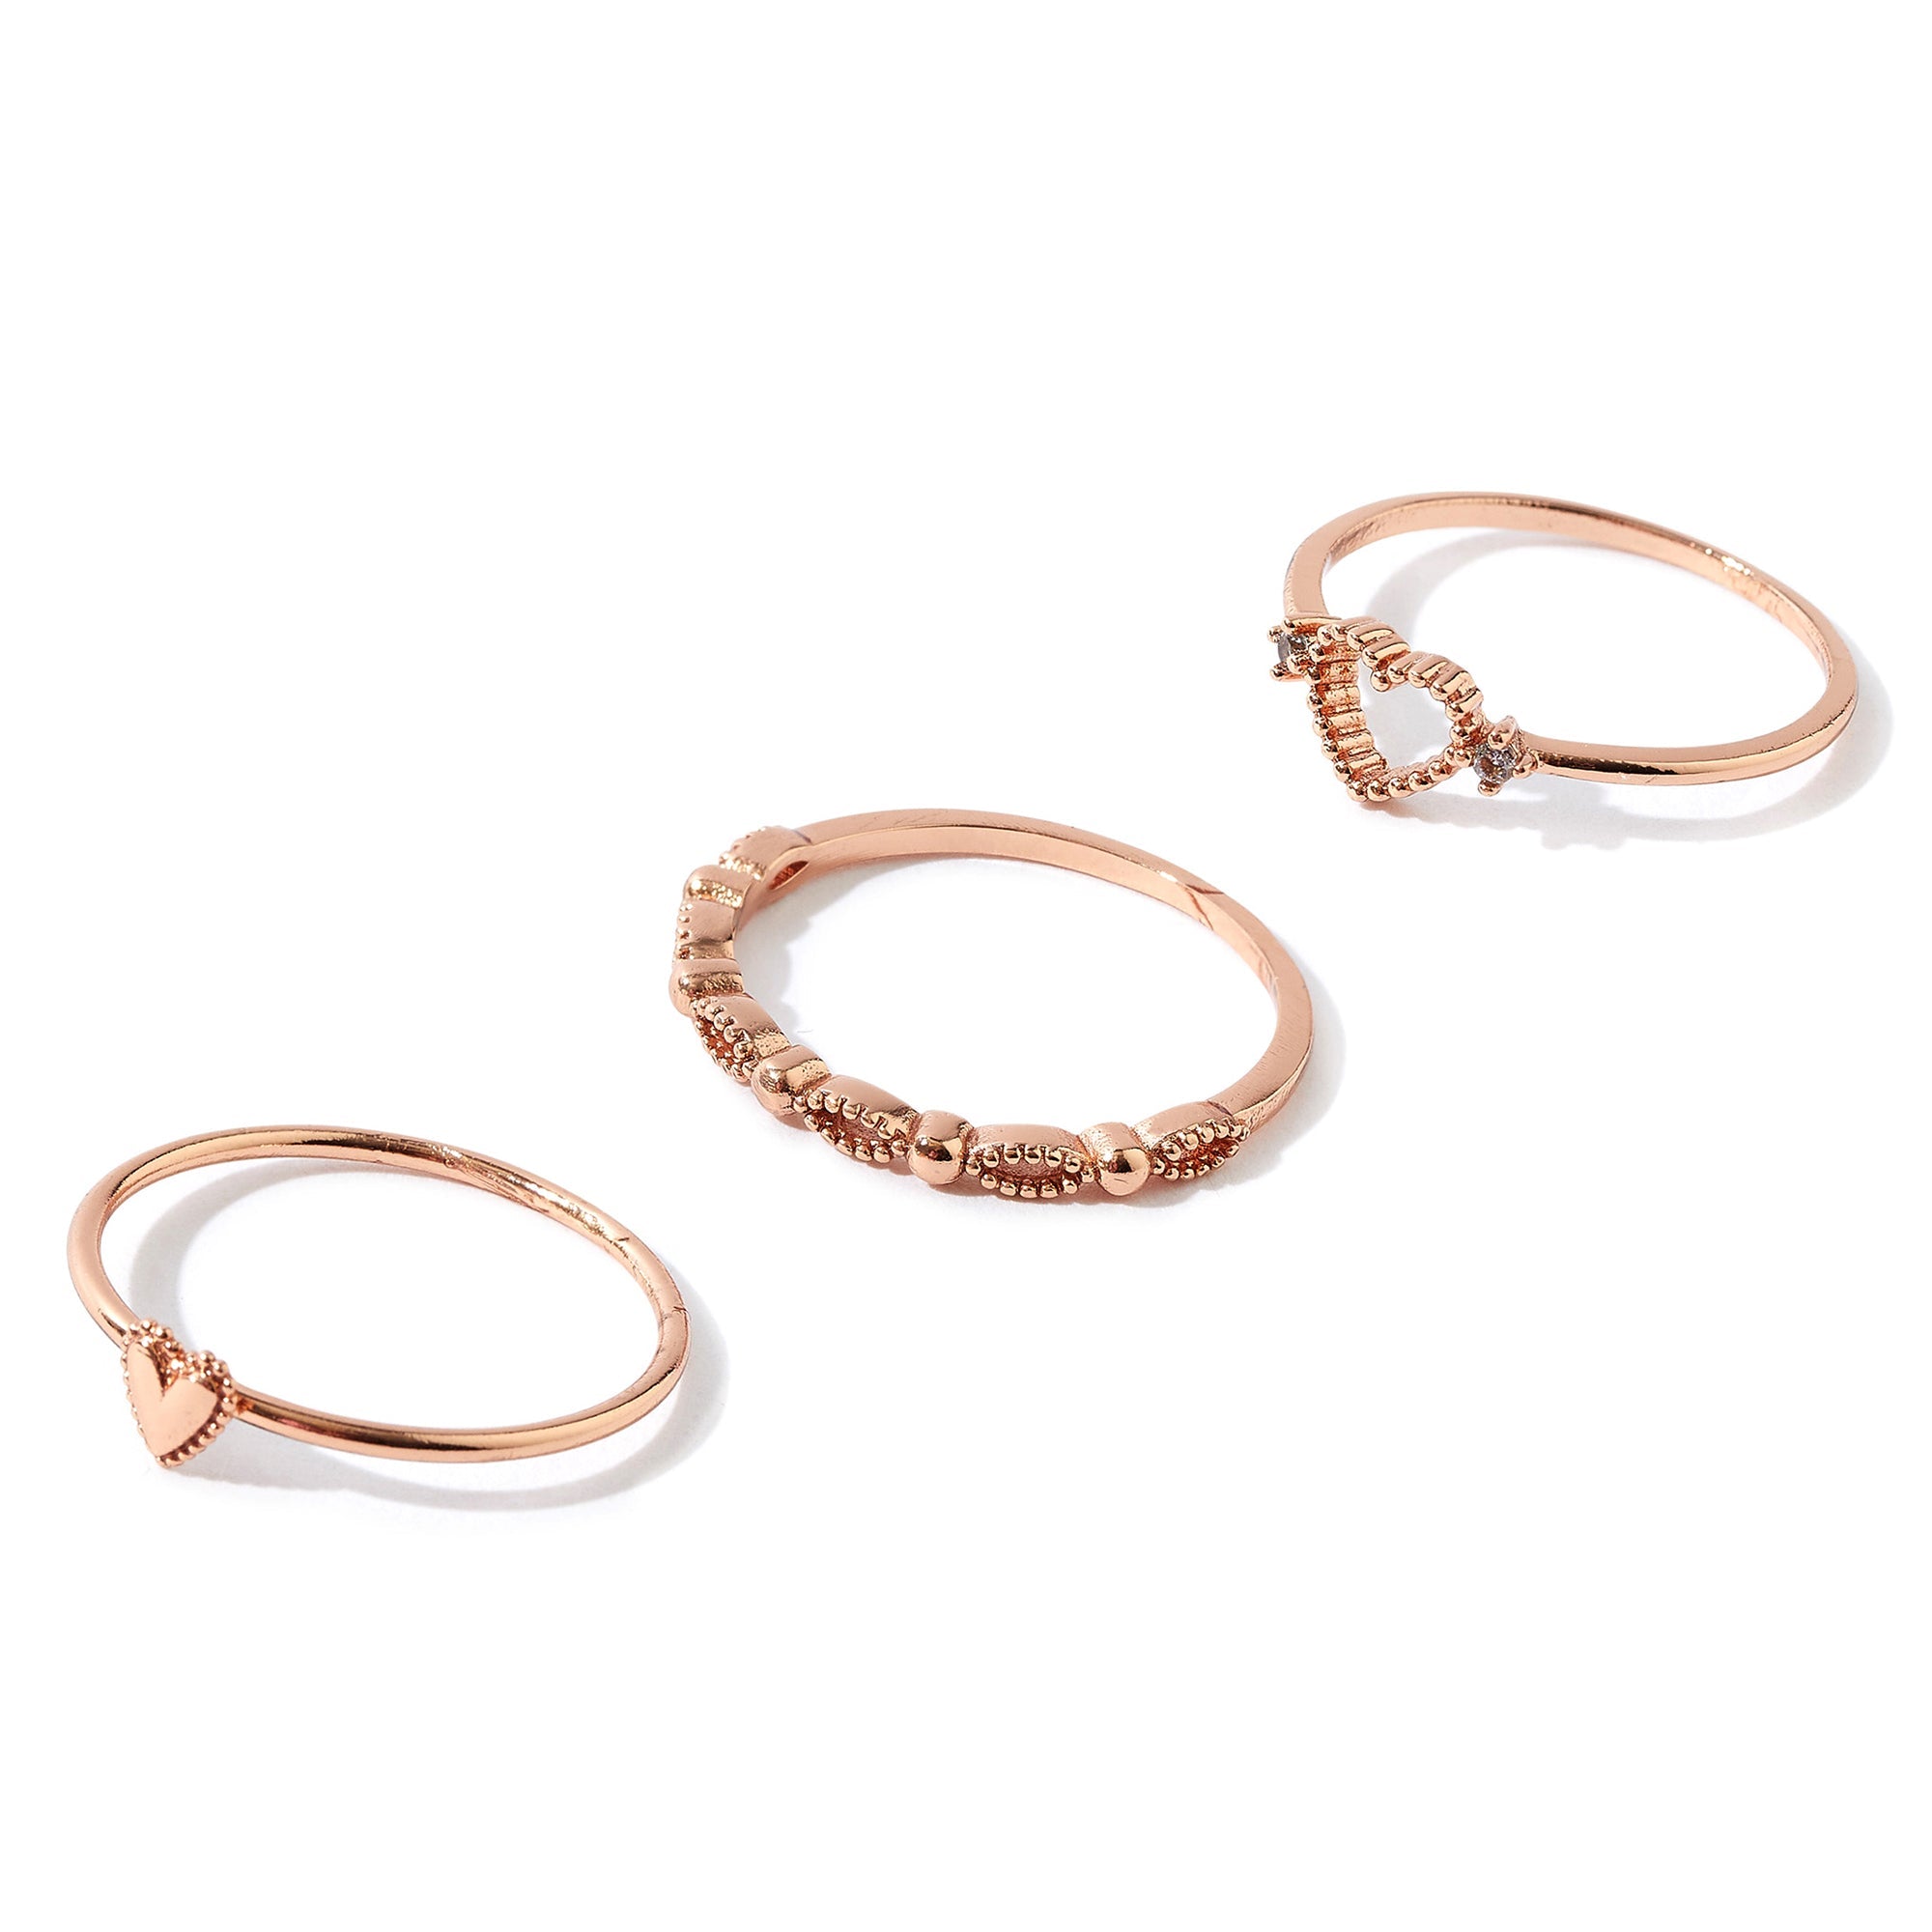 Real Gold Plated 3 Pack Stacking Rings For Women By Accessorize London Medium